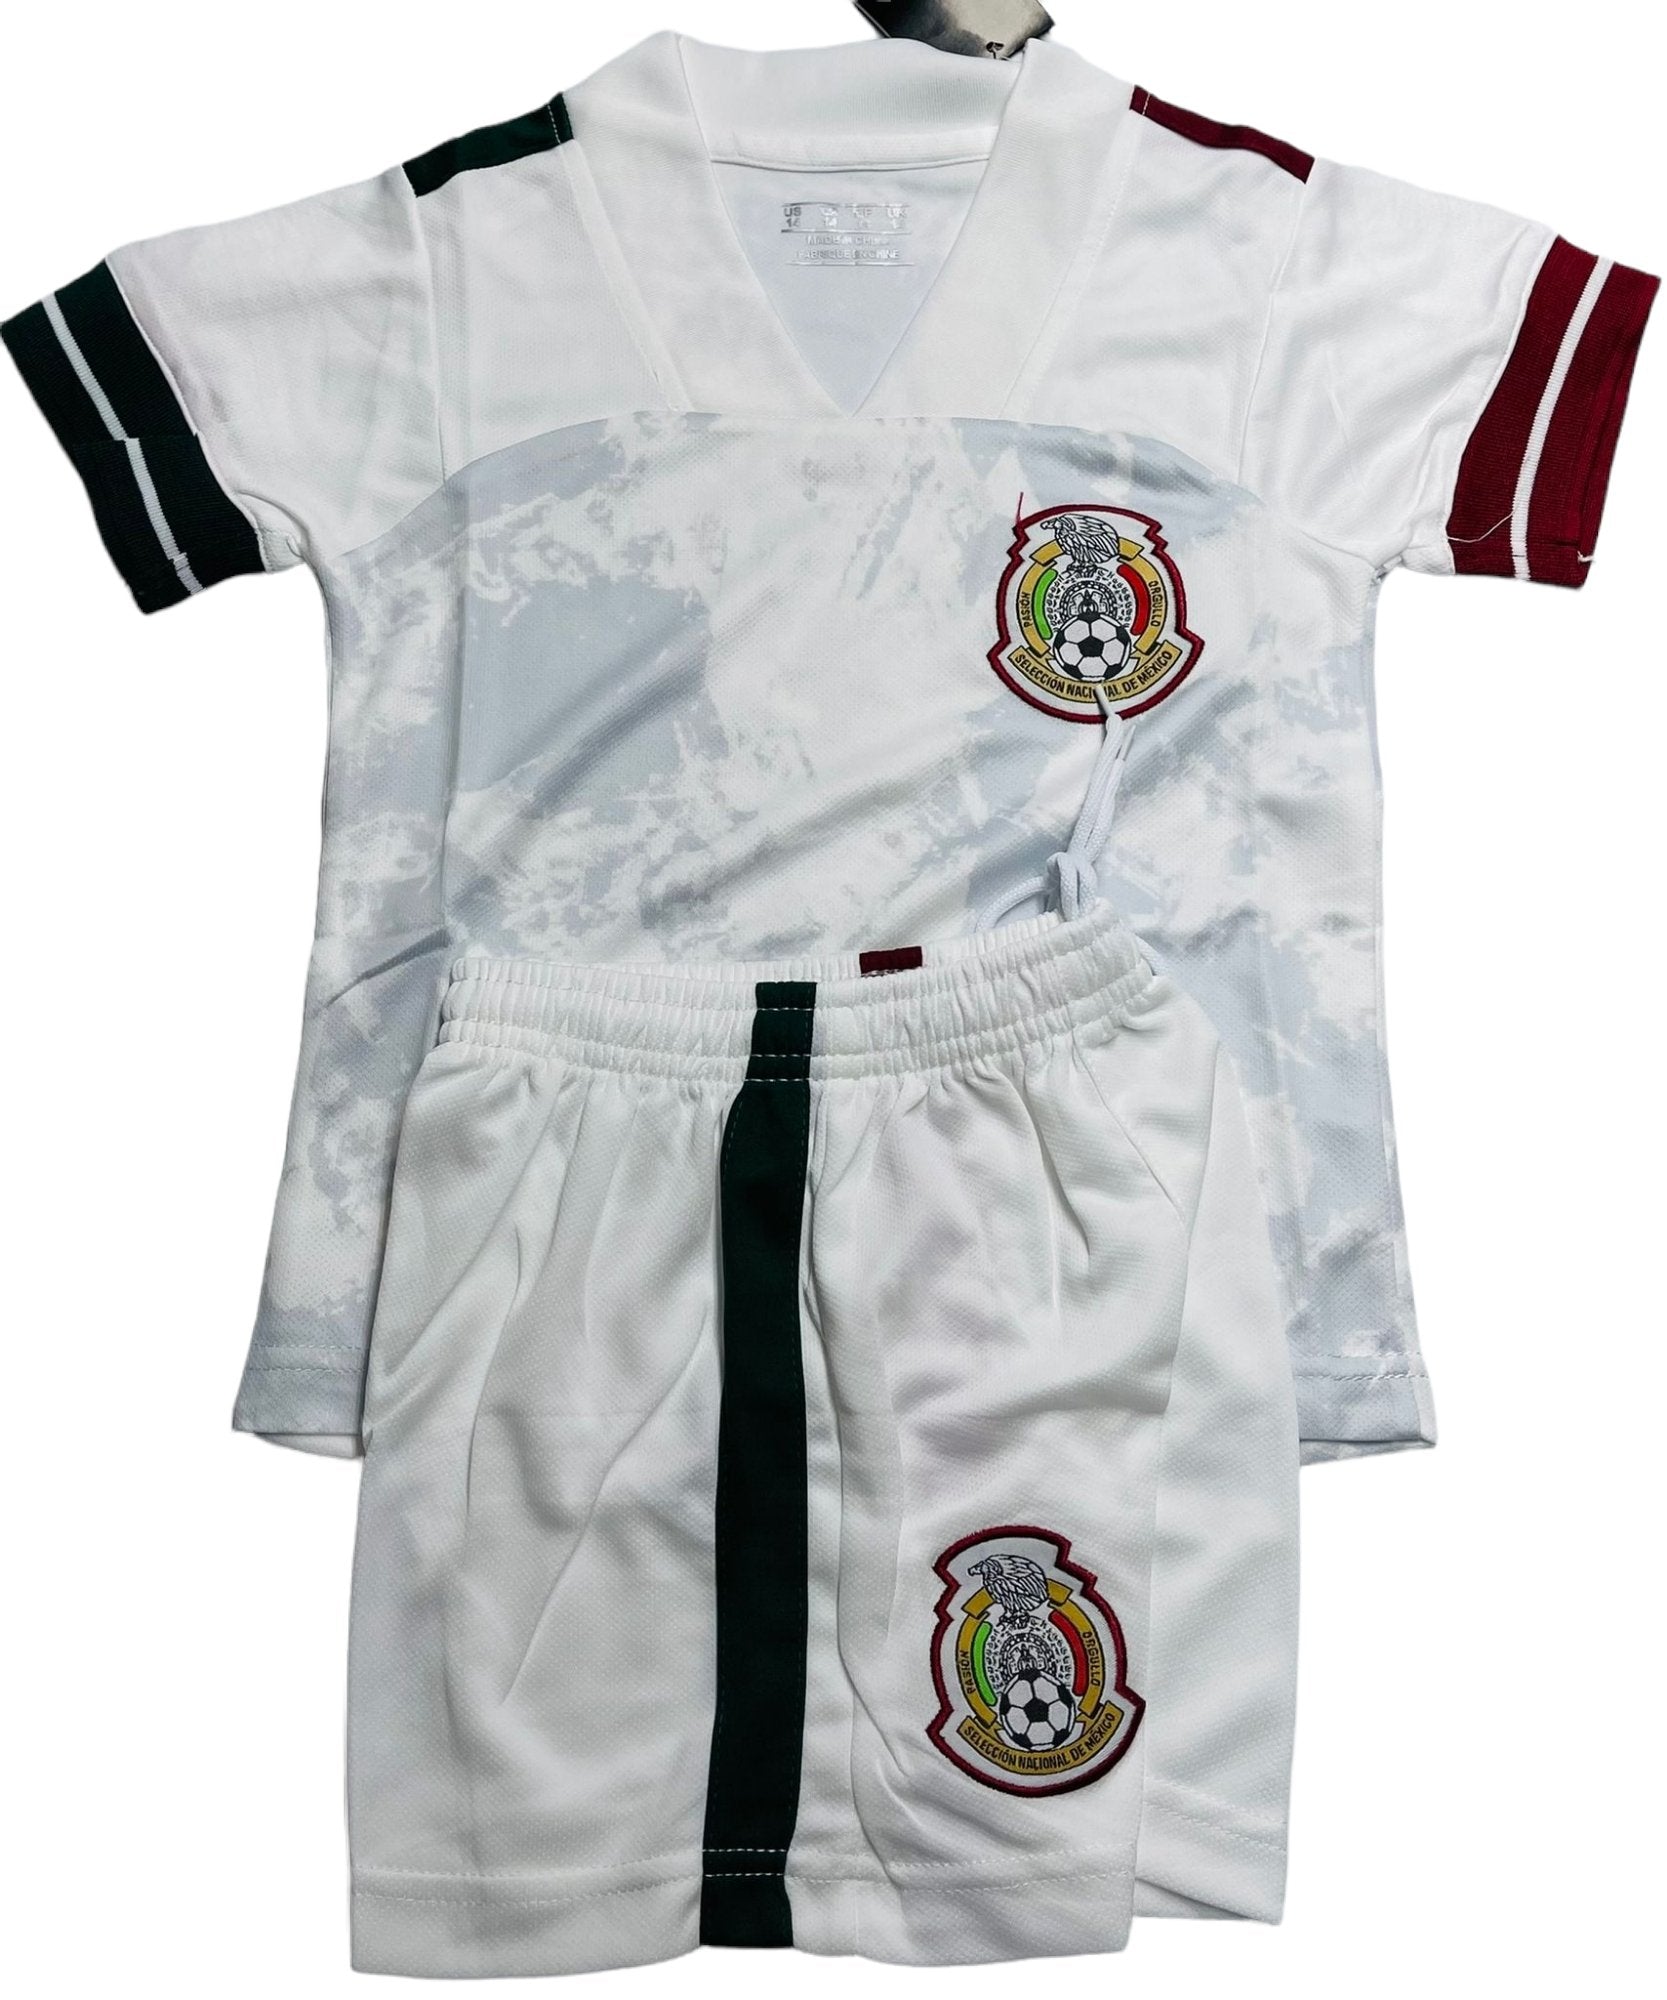 mexican soccer jersey white